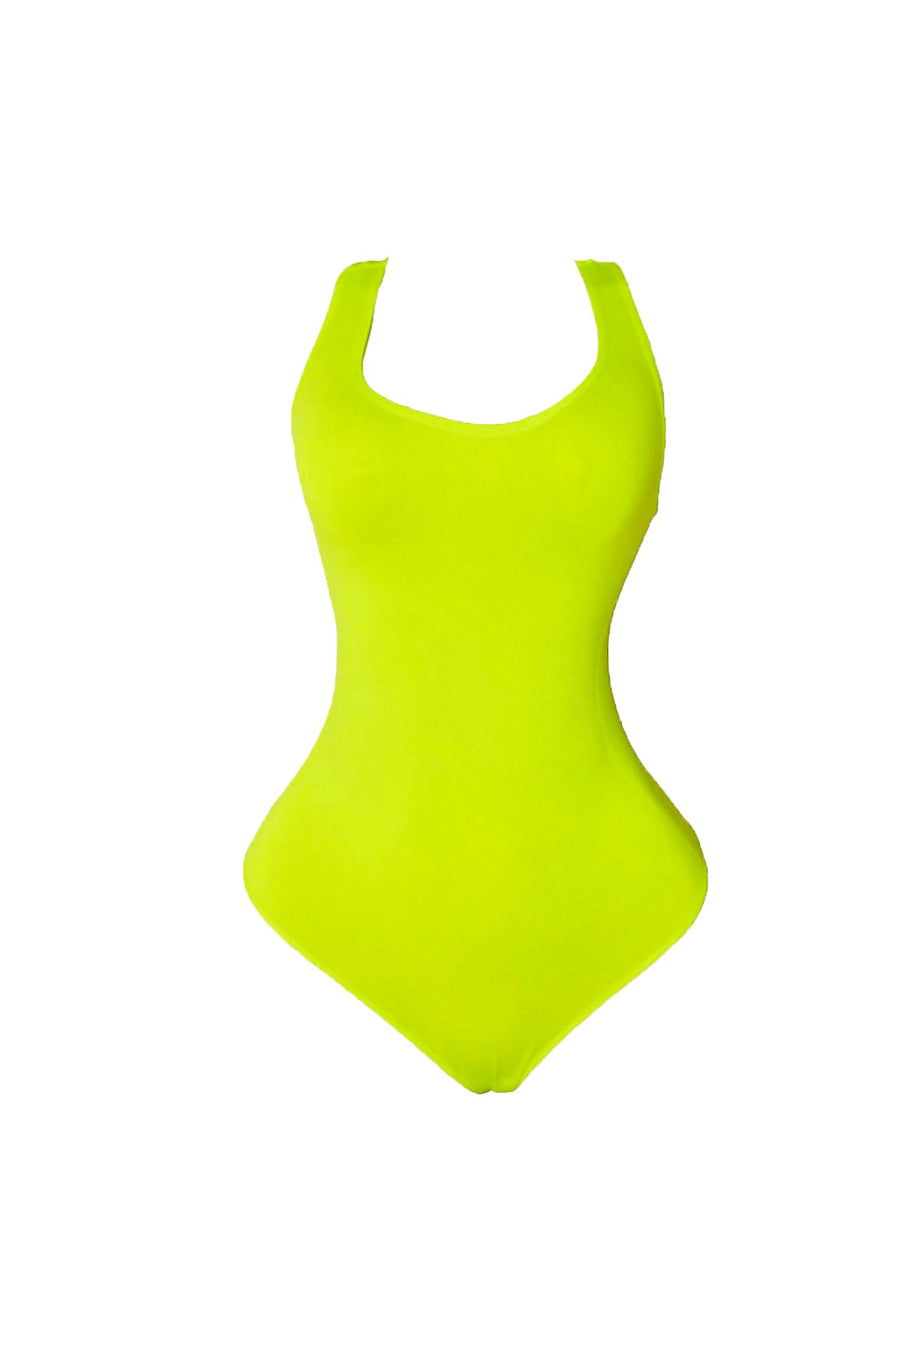 Neon Lime Body By Babes Thong Bodysuit w/ Tummy Control fits up to plus